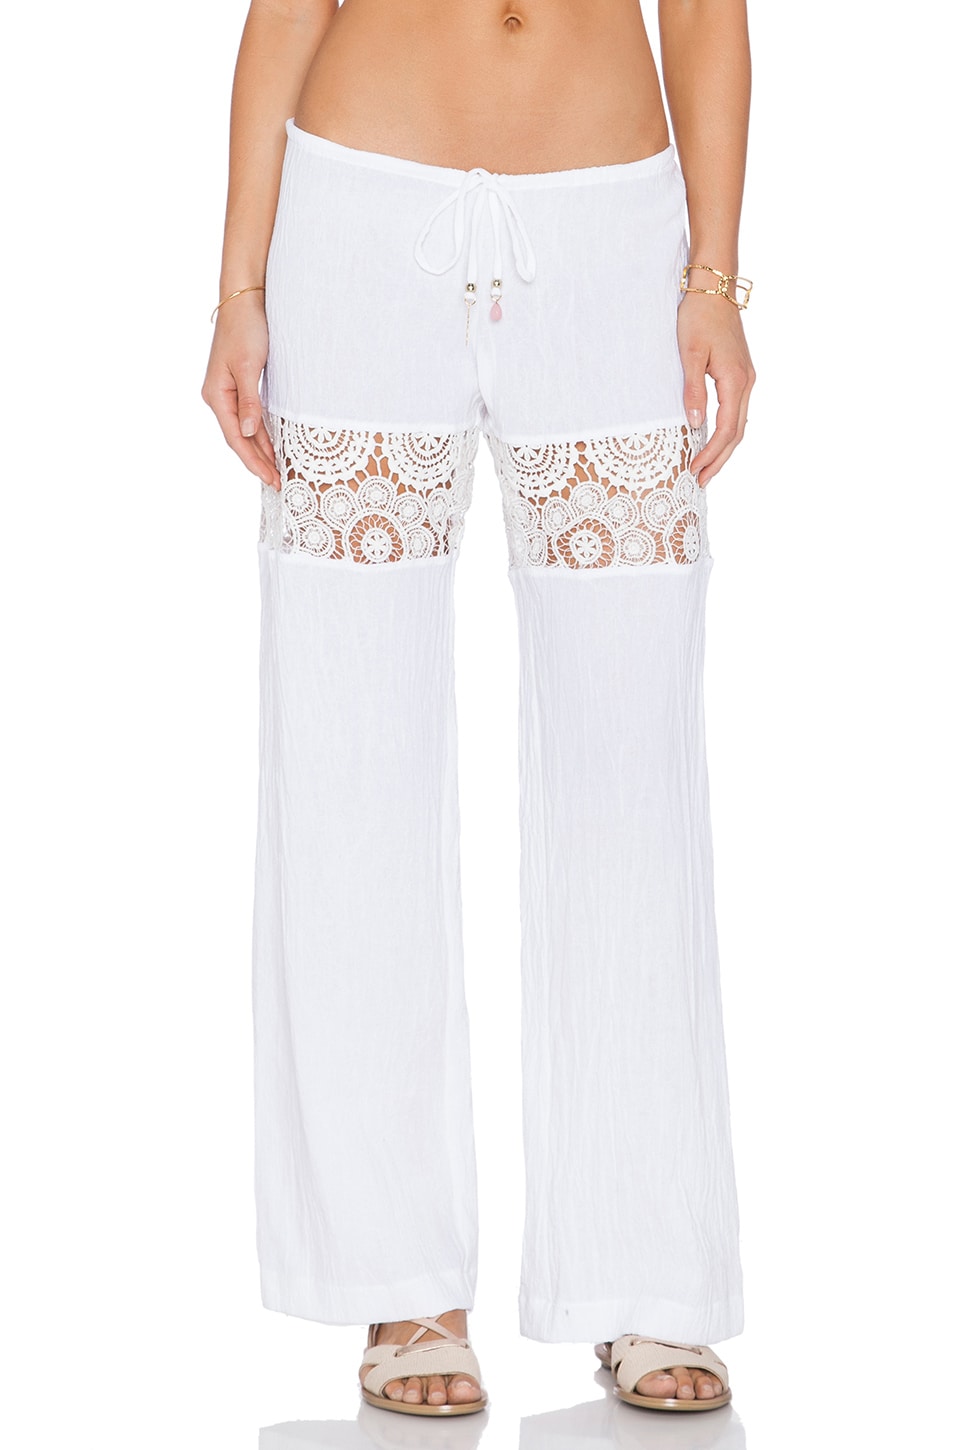 ale by alessandra White Sands Lace Pant in White